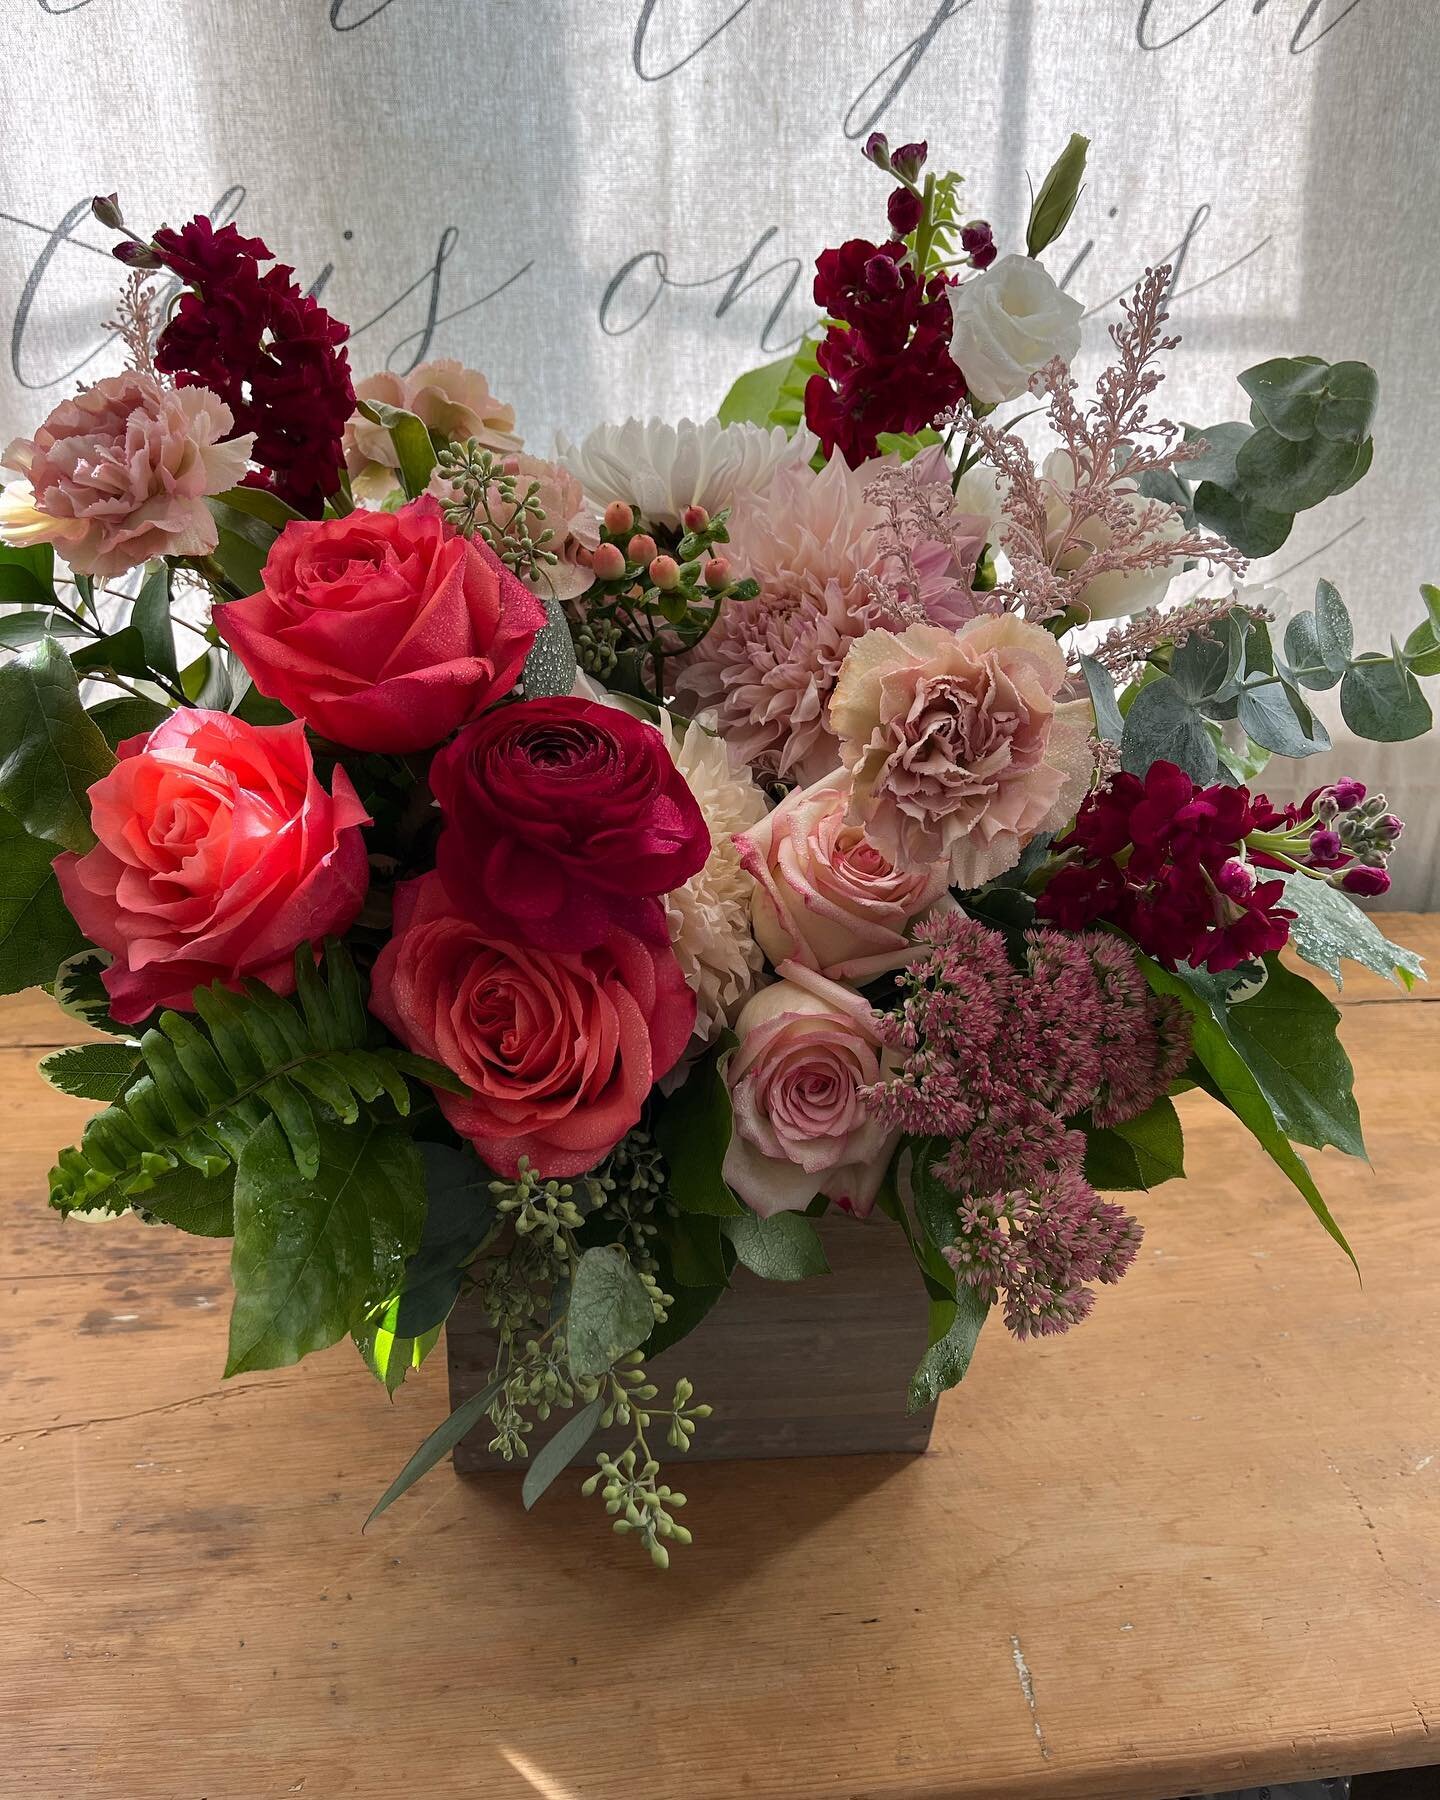 Curated Bloom Boxes!  Reach out on our website to order for someone special in your life!  #bloomboxeshorseshoevalley #barriefloraldelivery #oromedontefloraldesigner #customfloralsoromedonte #customweddingfloralsmuskoka #flowerdeliverynearme #trusted